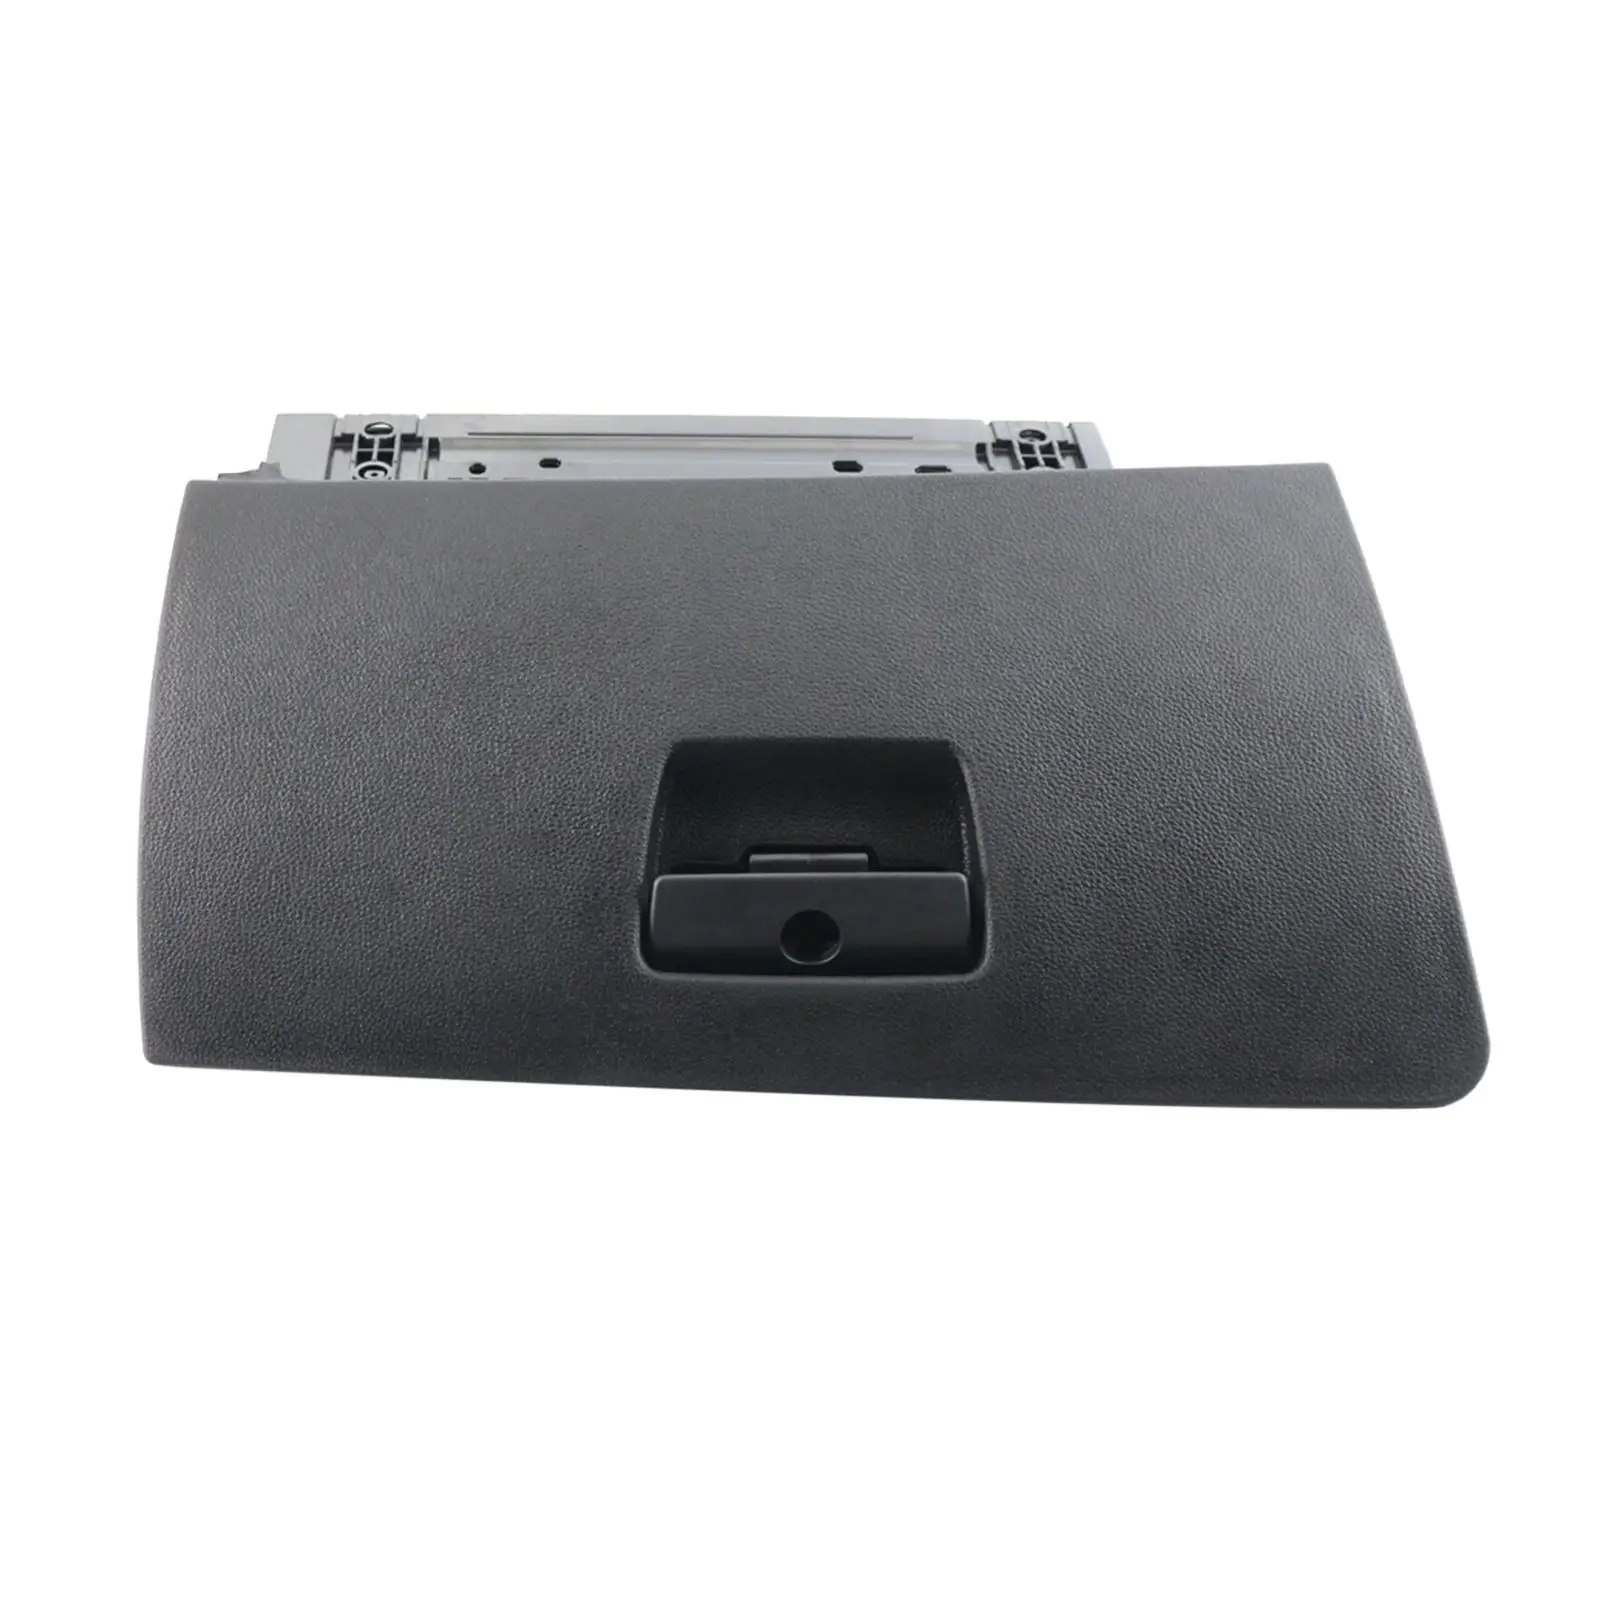 Glovebox Accessory Practical Easy to Install Replaces Durable Parts Glove Box Storage Compartment for BMW E90 D91 E92 06-13